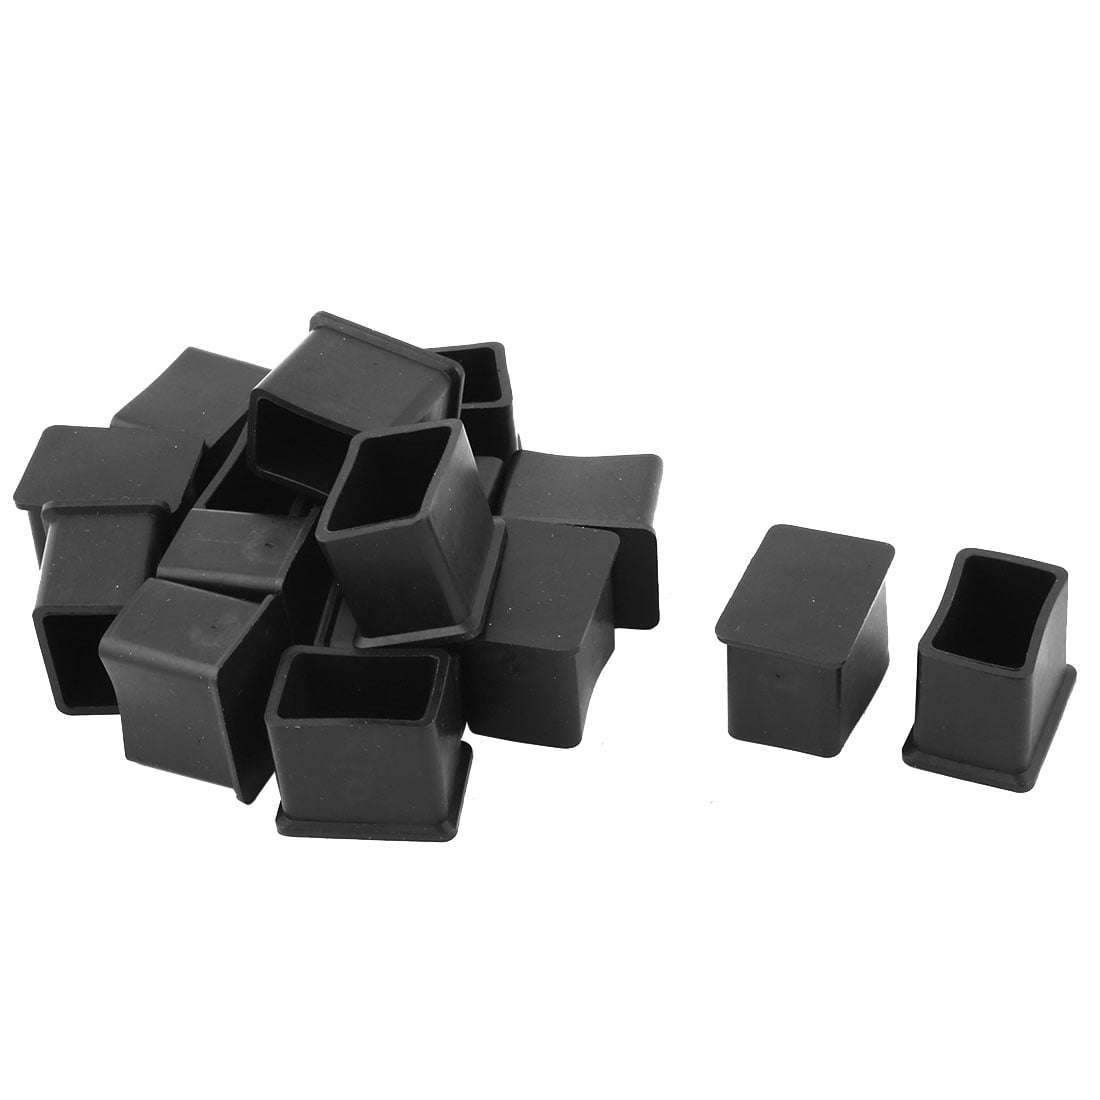 25mm x 25mm Rubber Square Shaped Furniture Foot Cover Protector Pad Black 12pcs 